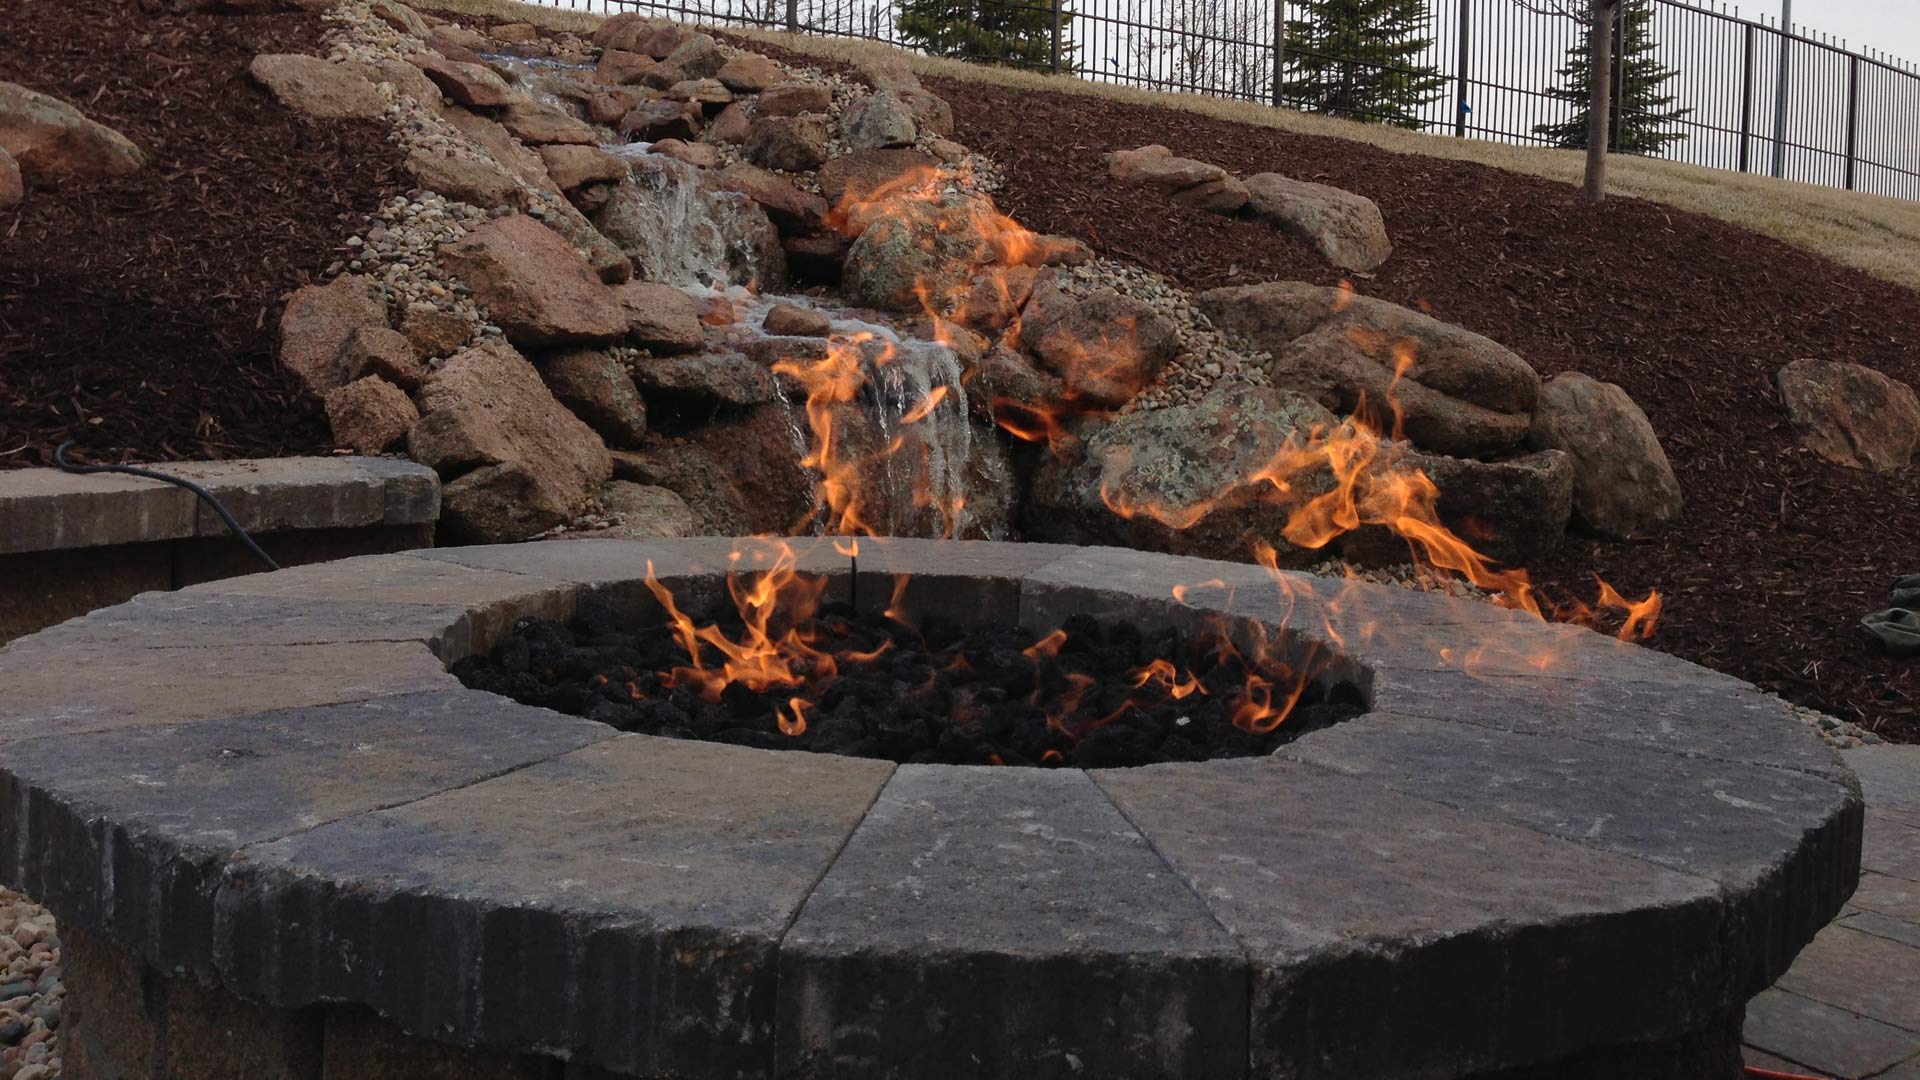 Fire pit flaming with water feature in the background in Valley, NE.